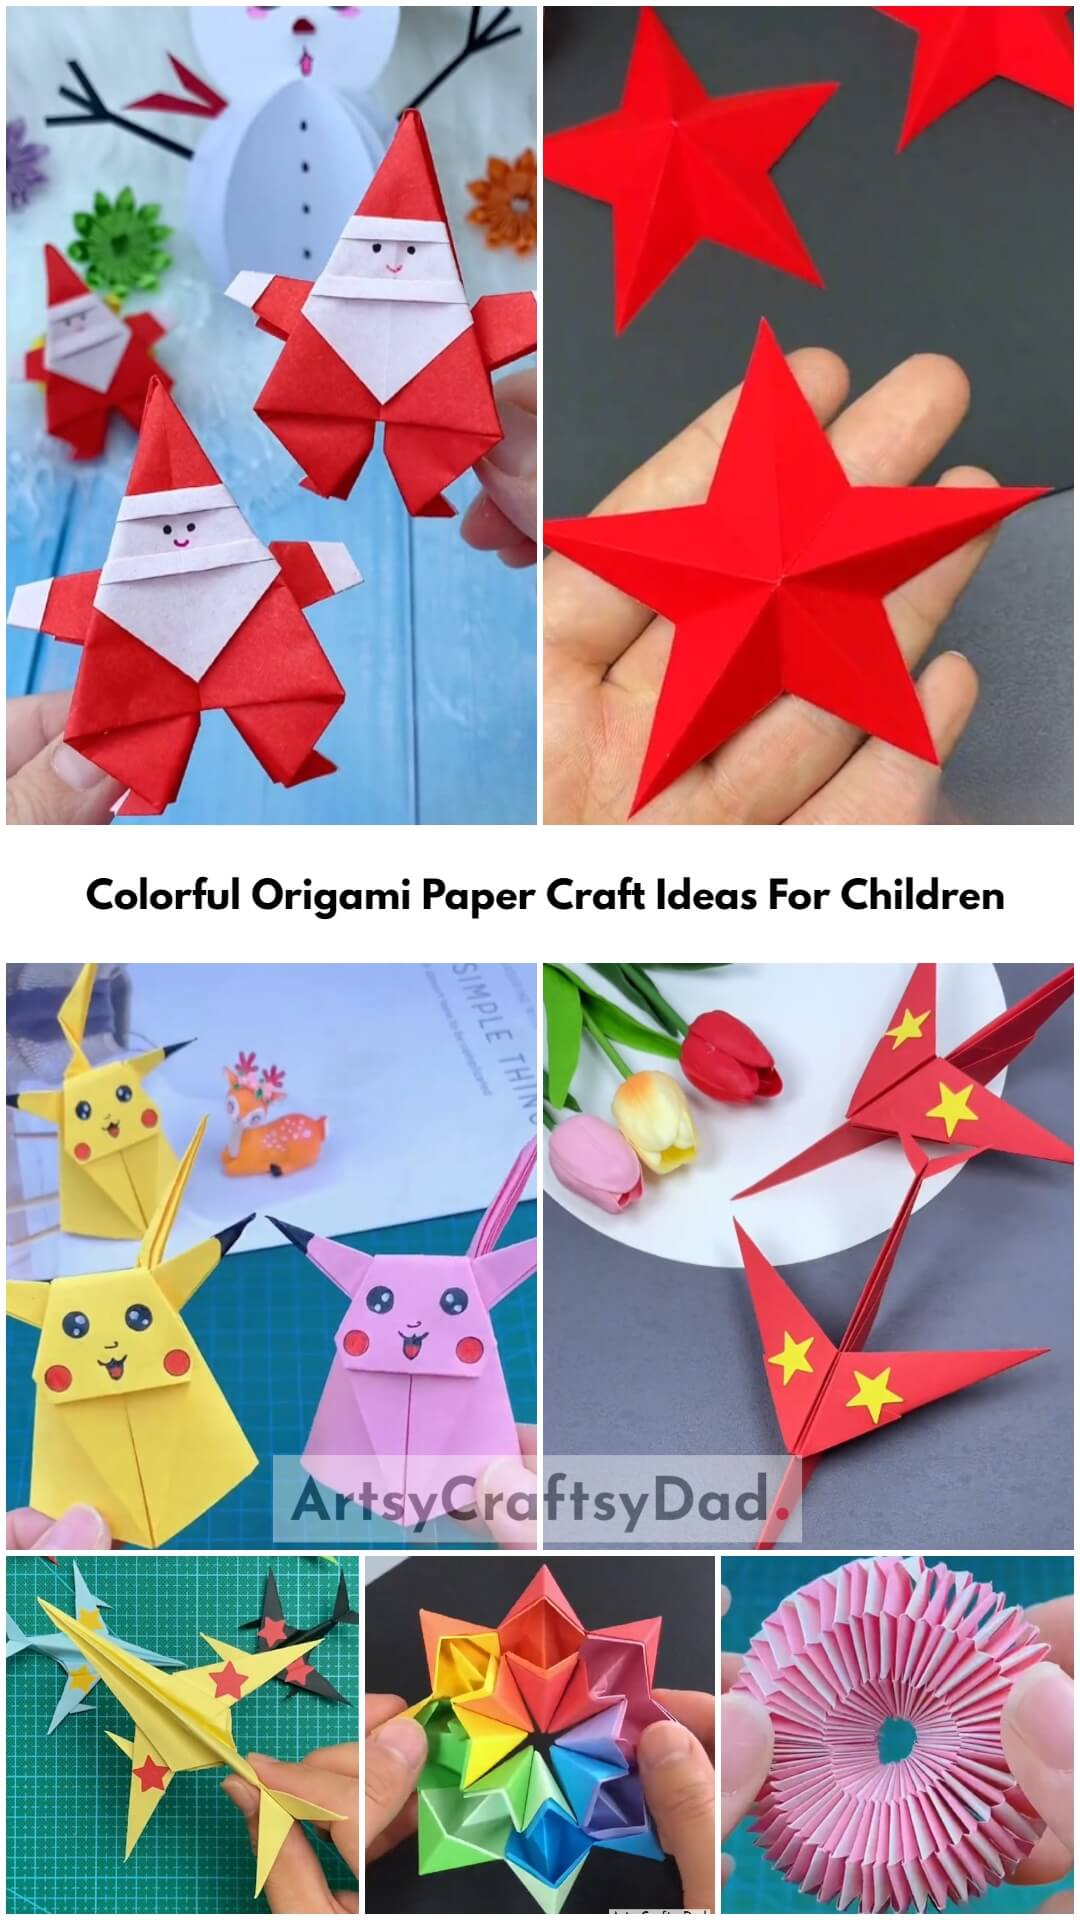 Colorful Origami Paper Craft Ideas For Children